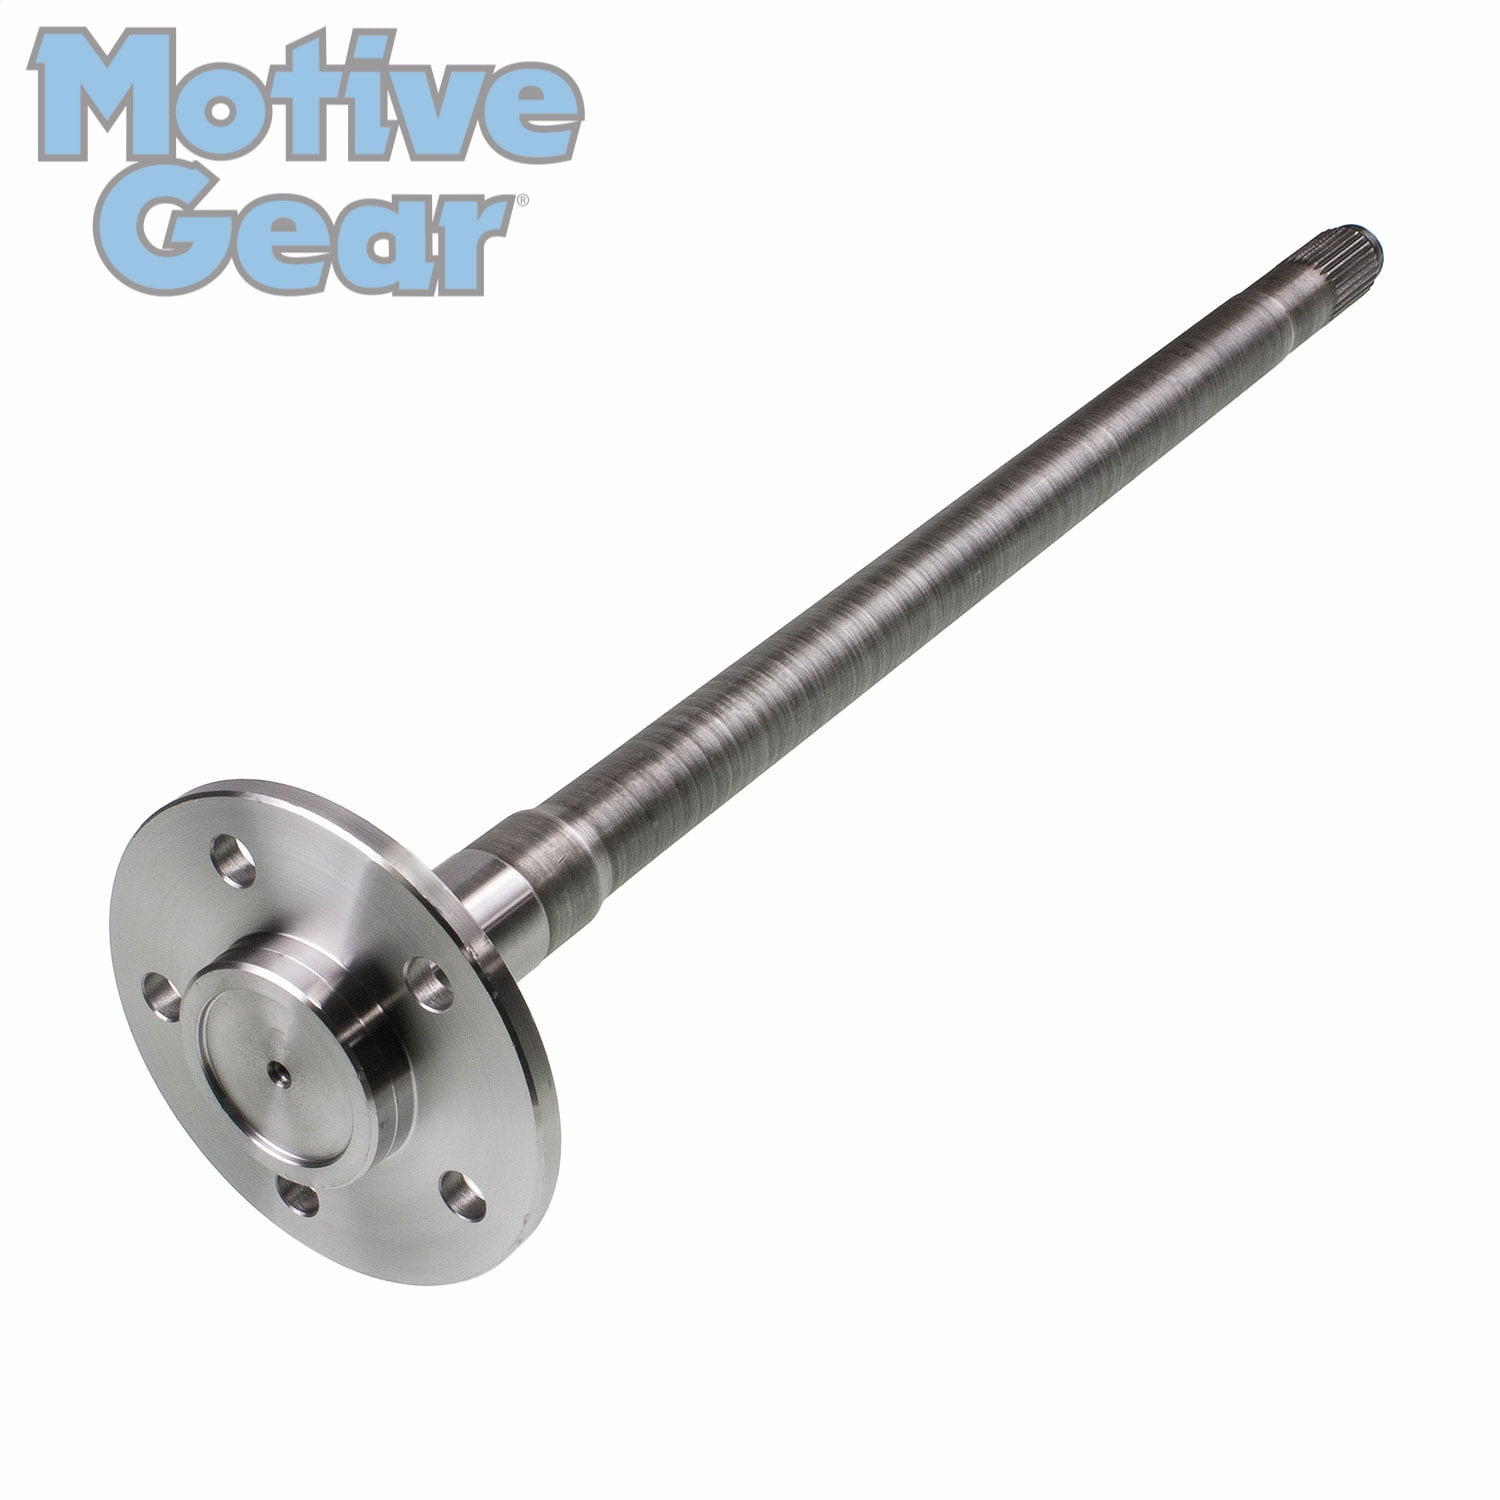 Motive Gear 15521928 9.5 Axle Shaft for GM Style 